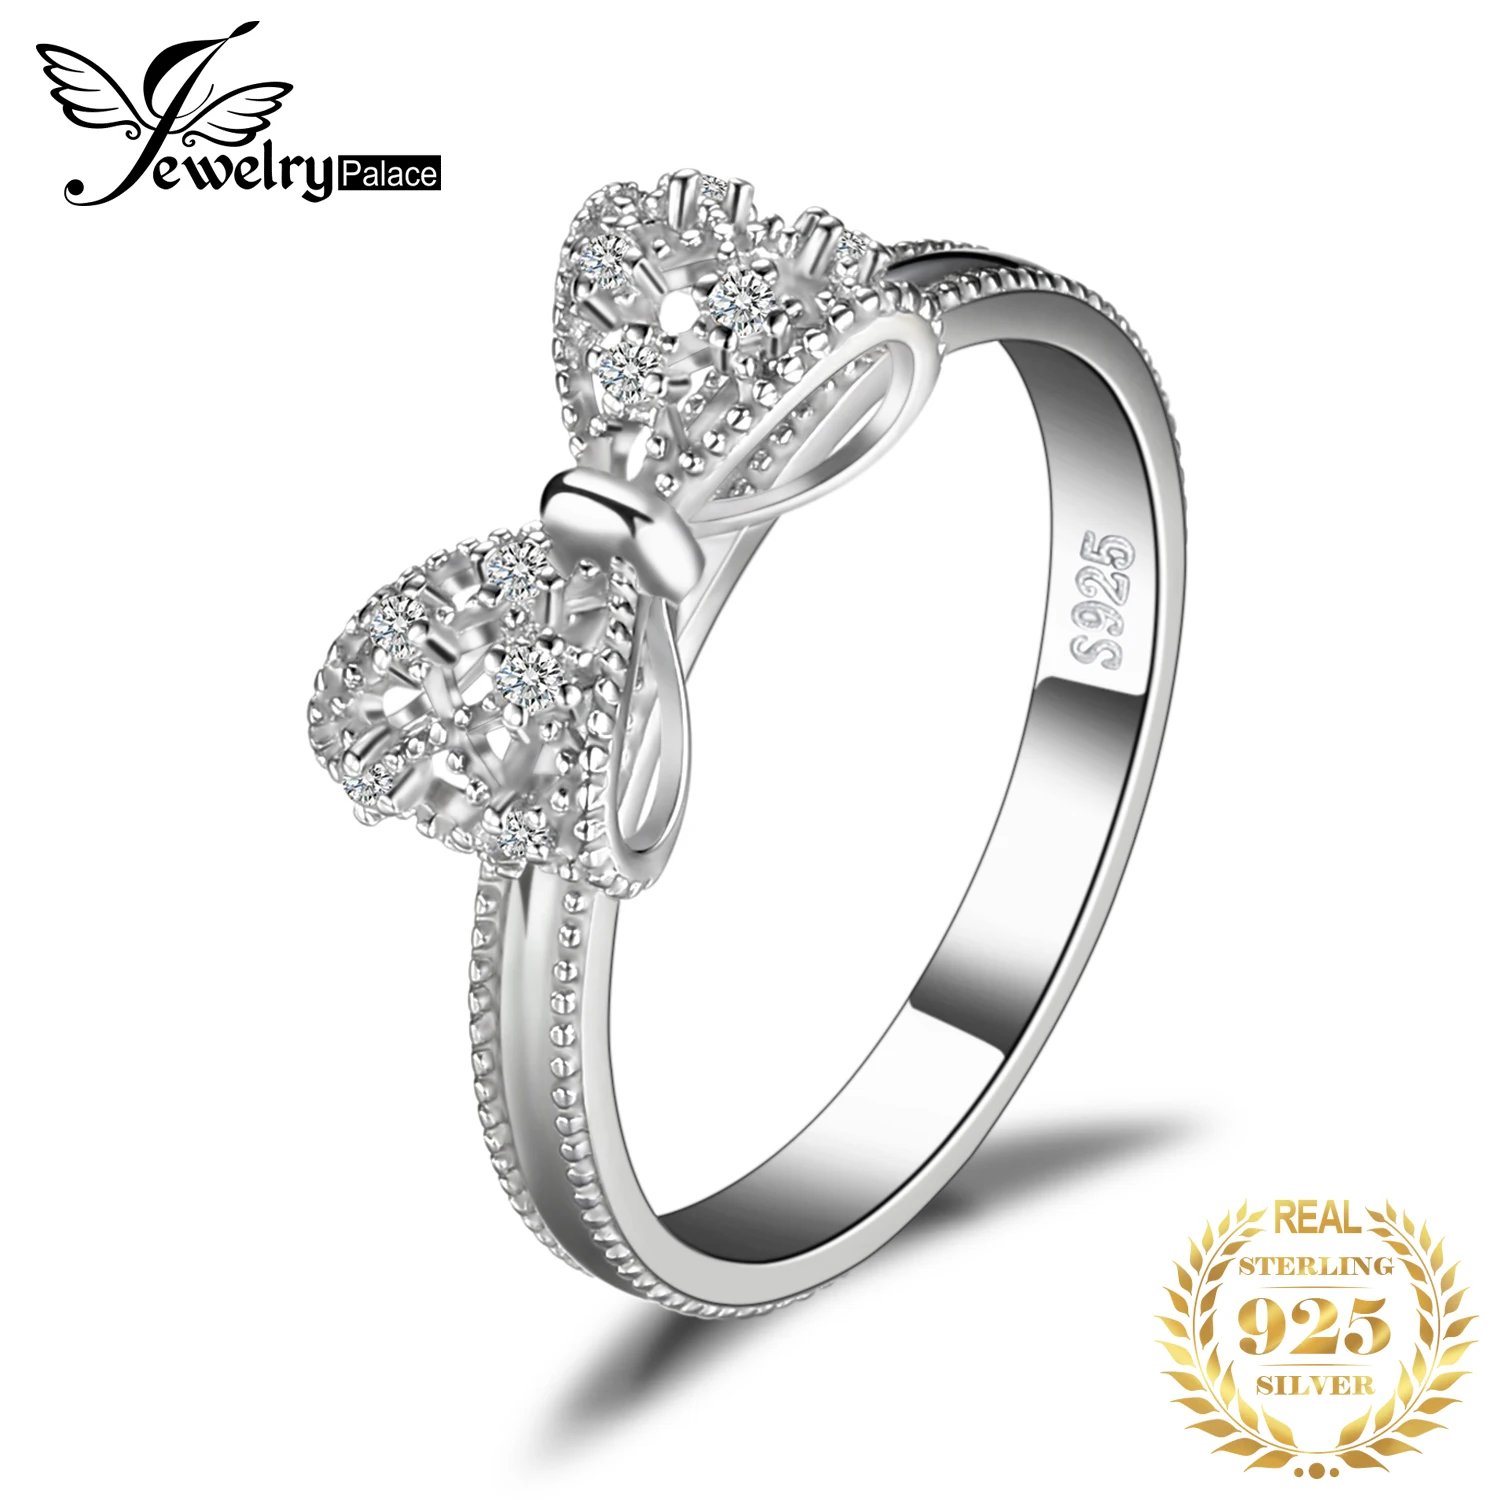 

JewelryPalace Bow knot Anniversary Cubic Zirconia Rings 925 Sterling Silver Rings for Women Silver 925 Jewelry Fine Jewelry